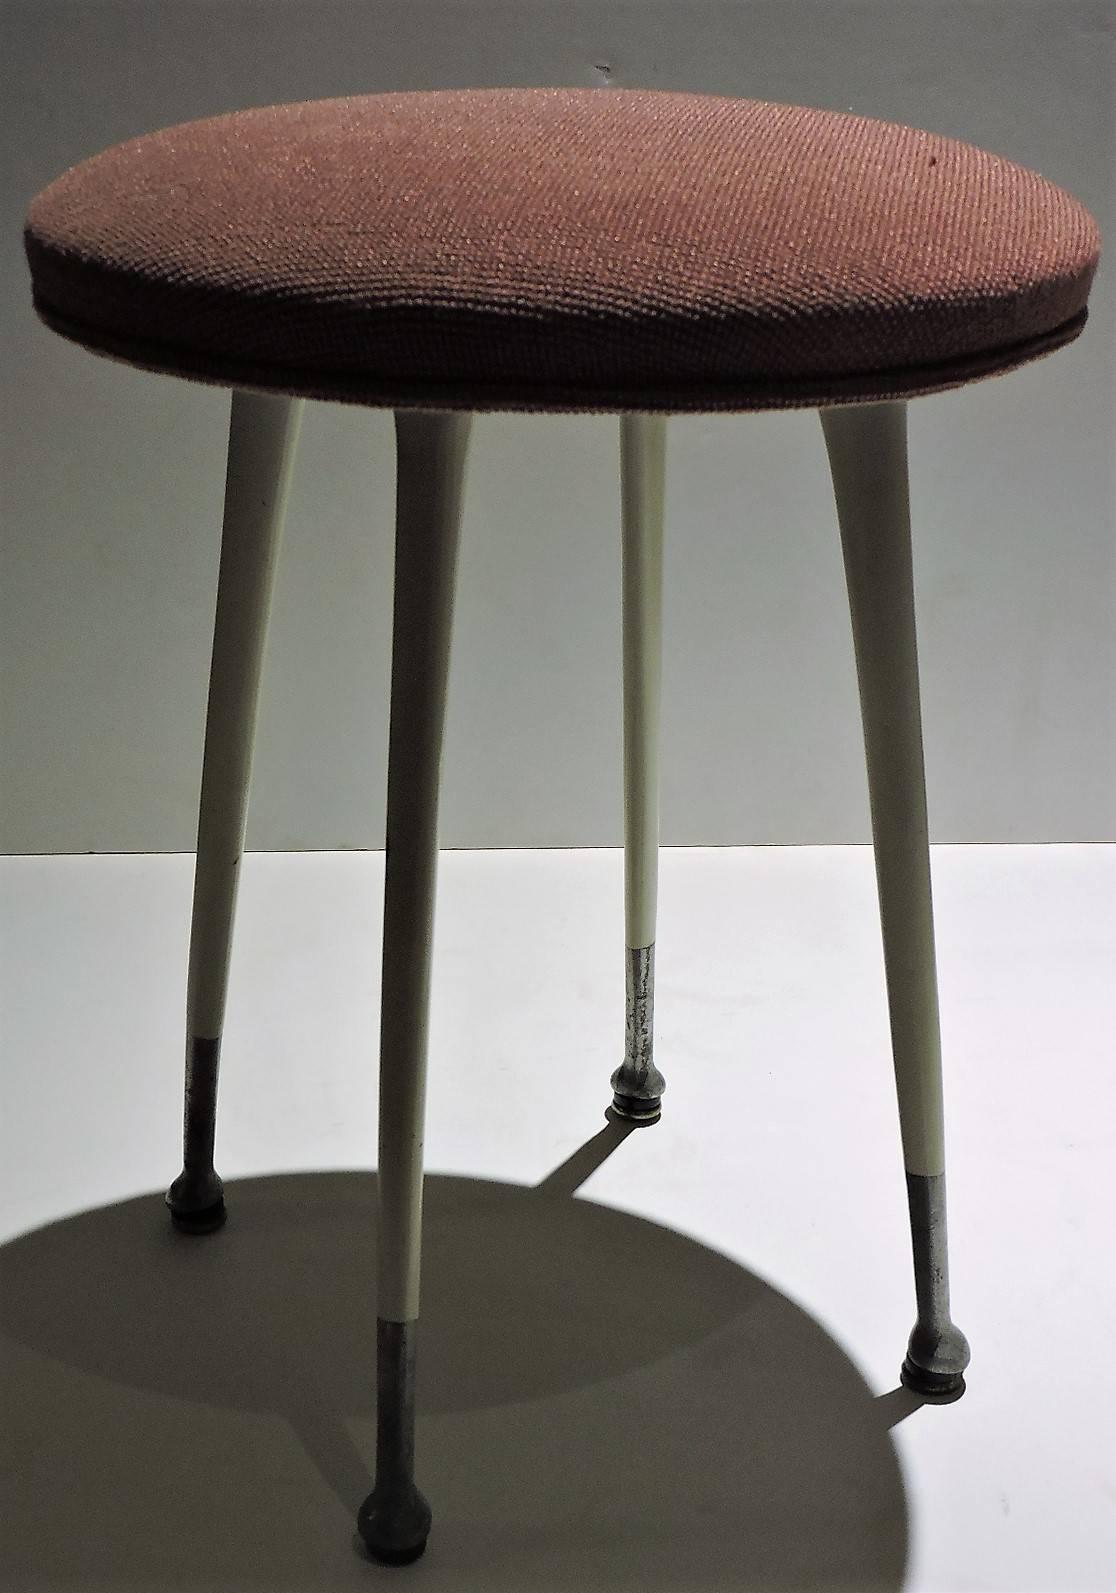 20th Century Gazelle Stool by Shelby Williams